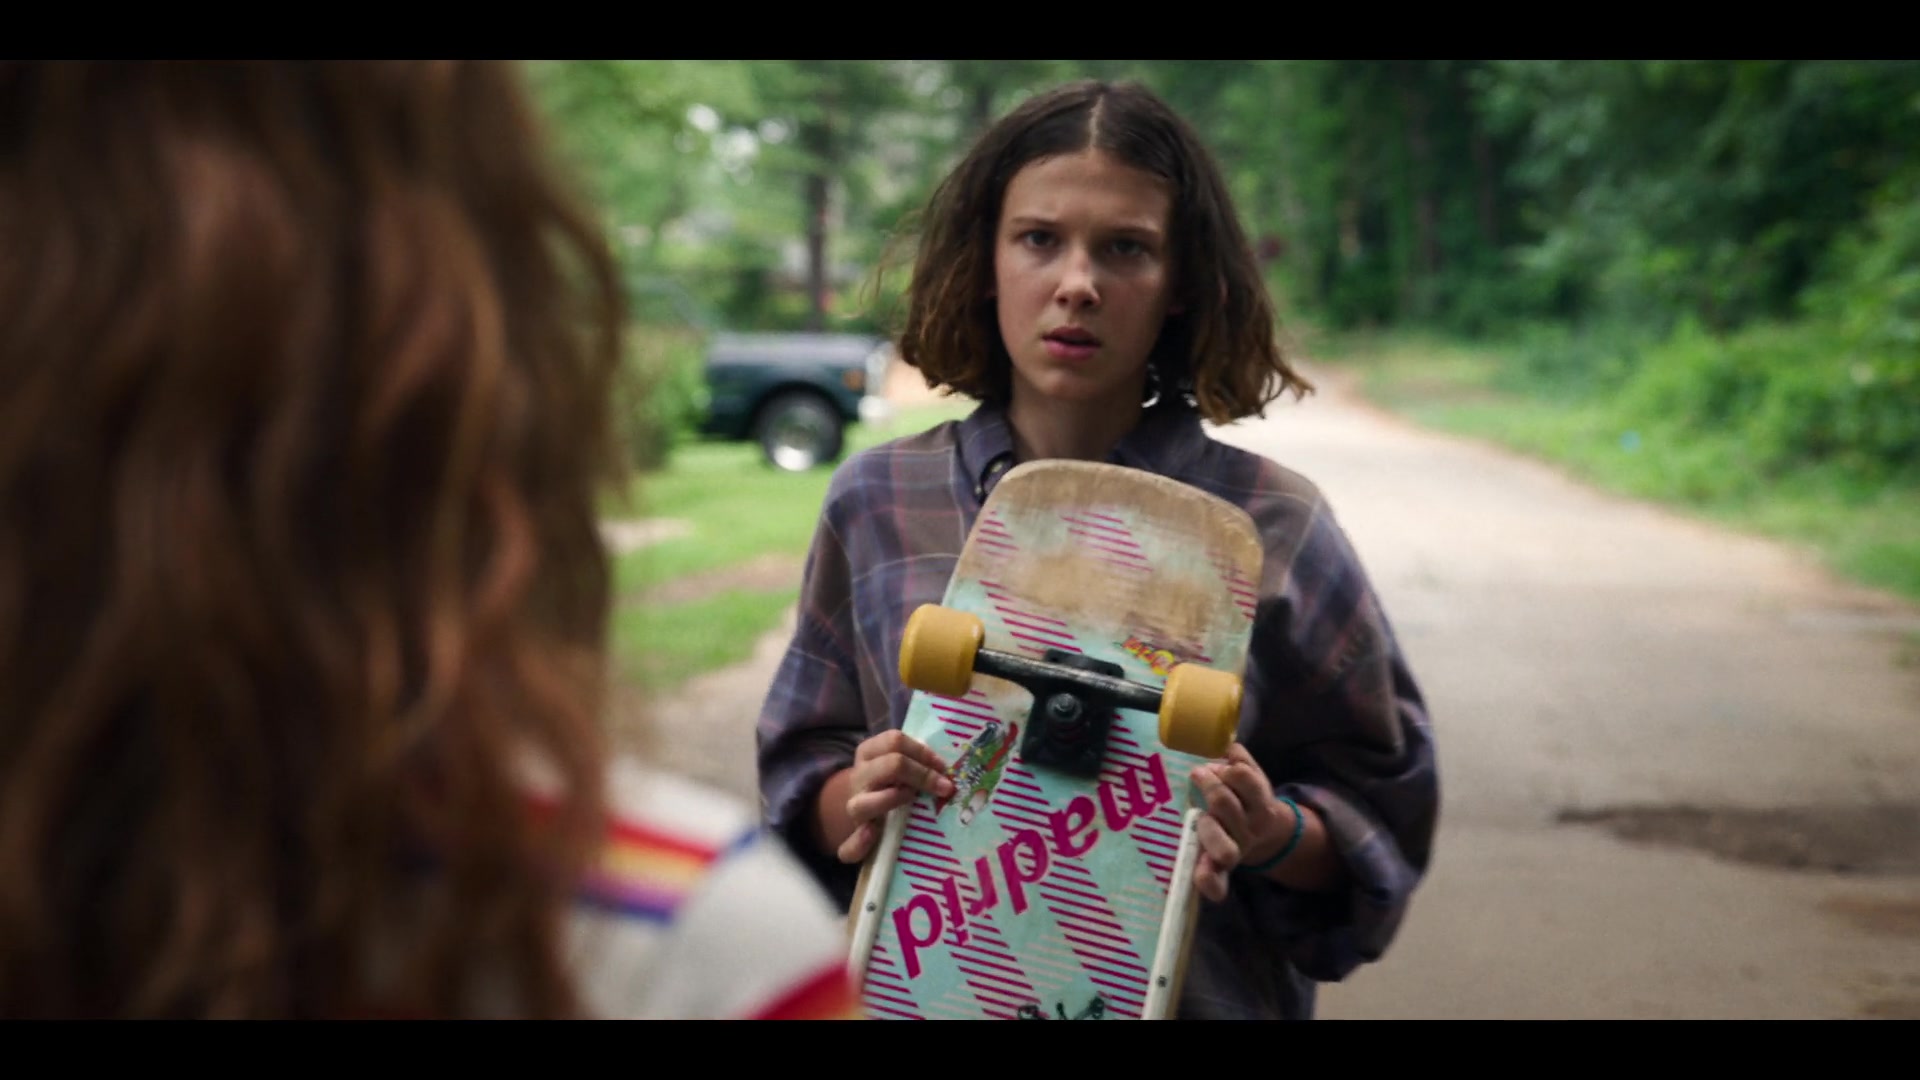 Madrid Skateboard Held By Millie Bobby Brown As Eleven Or ...